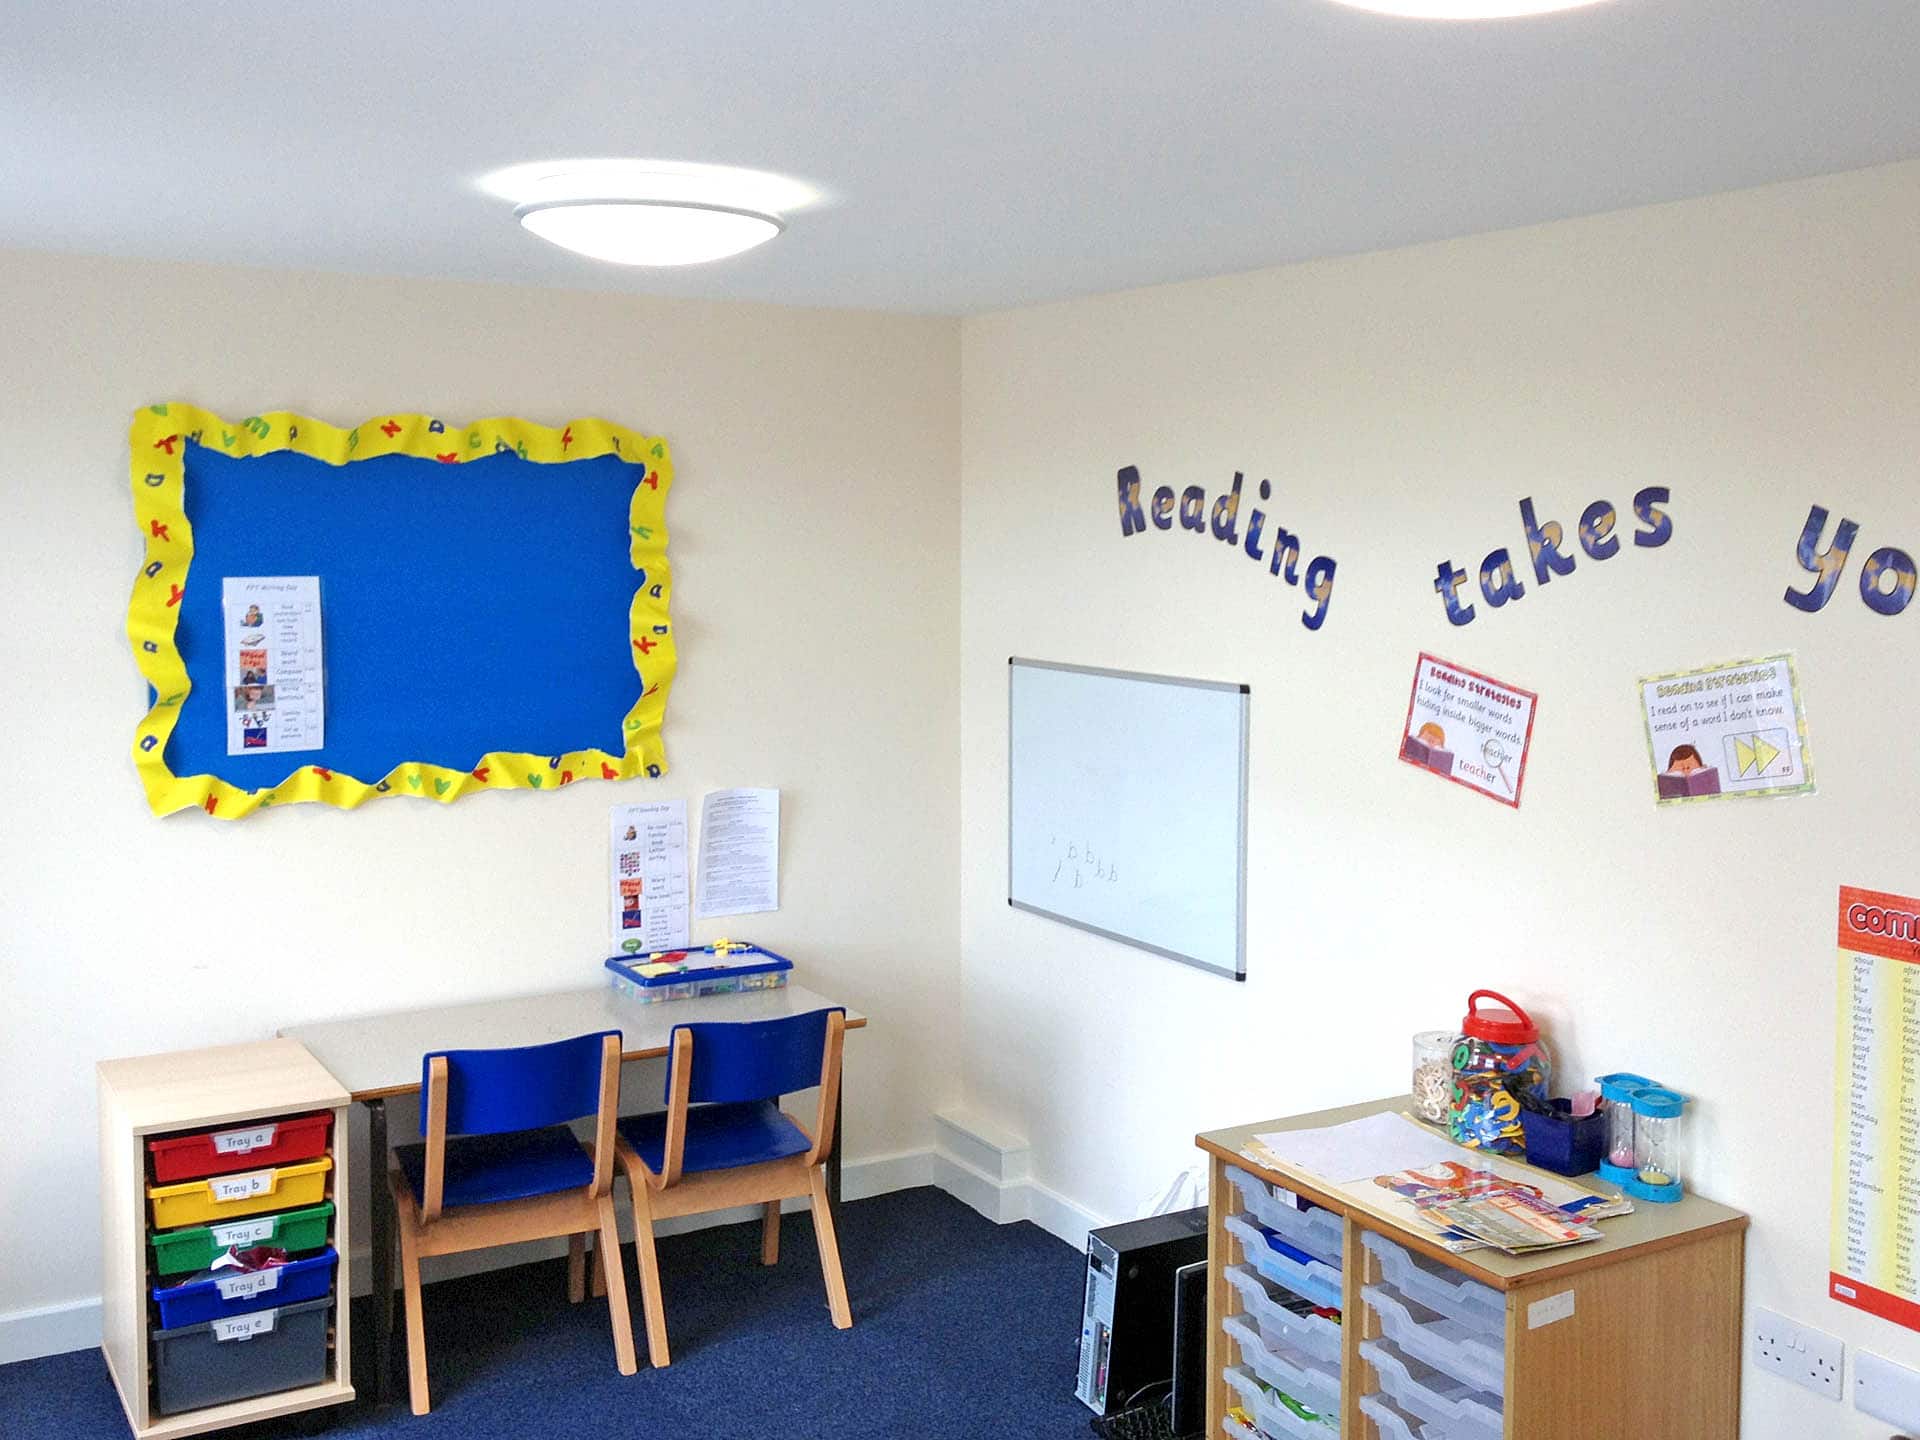 Commercial - Cledford School